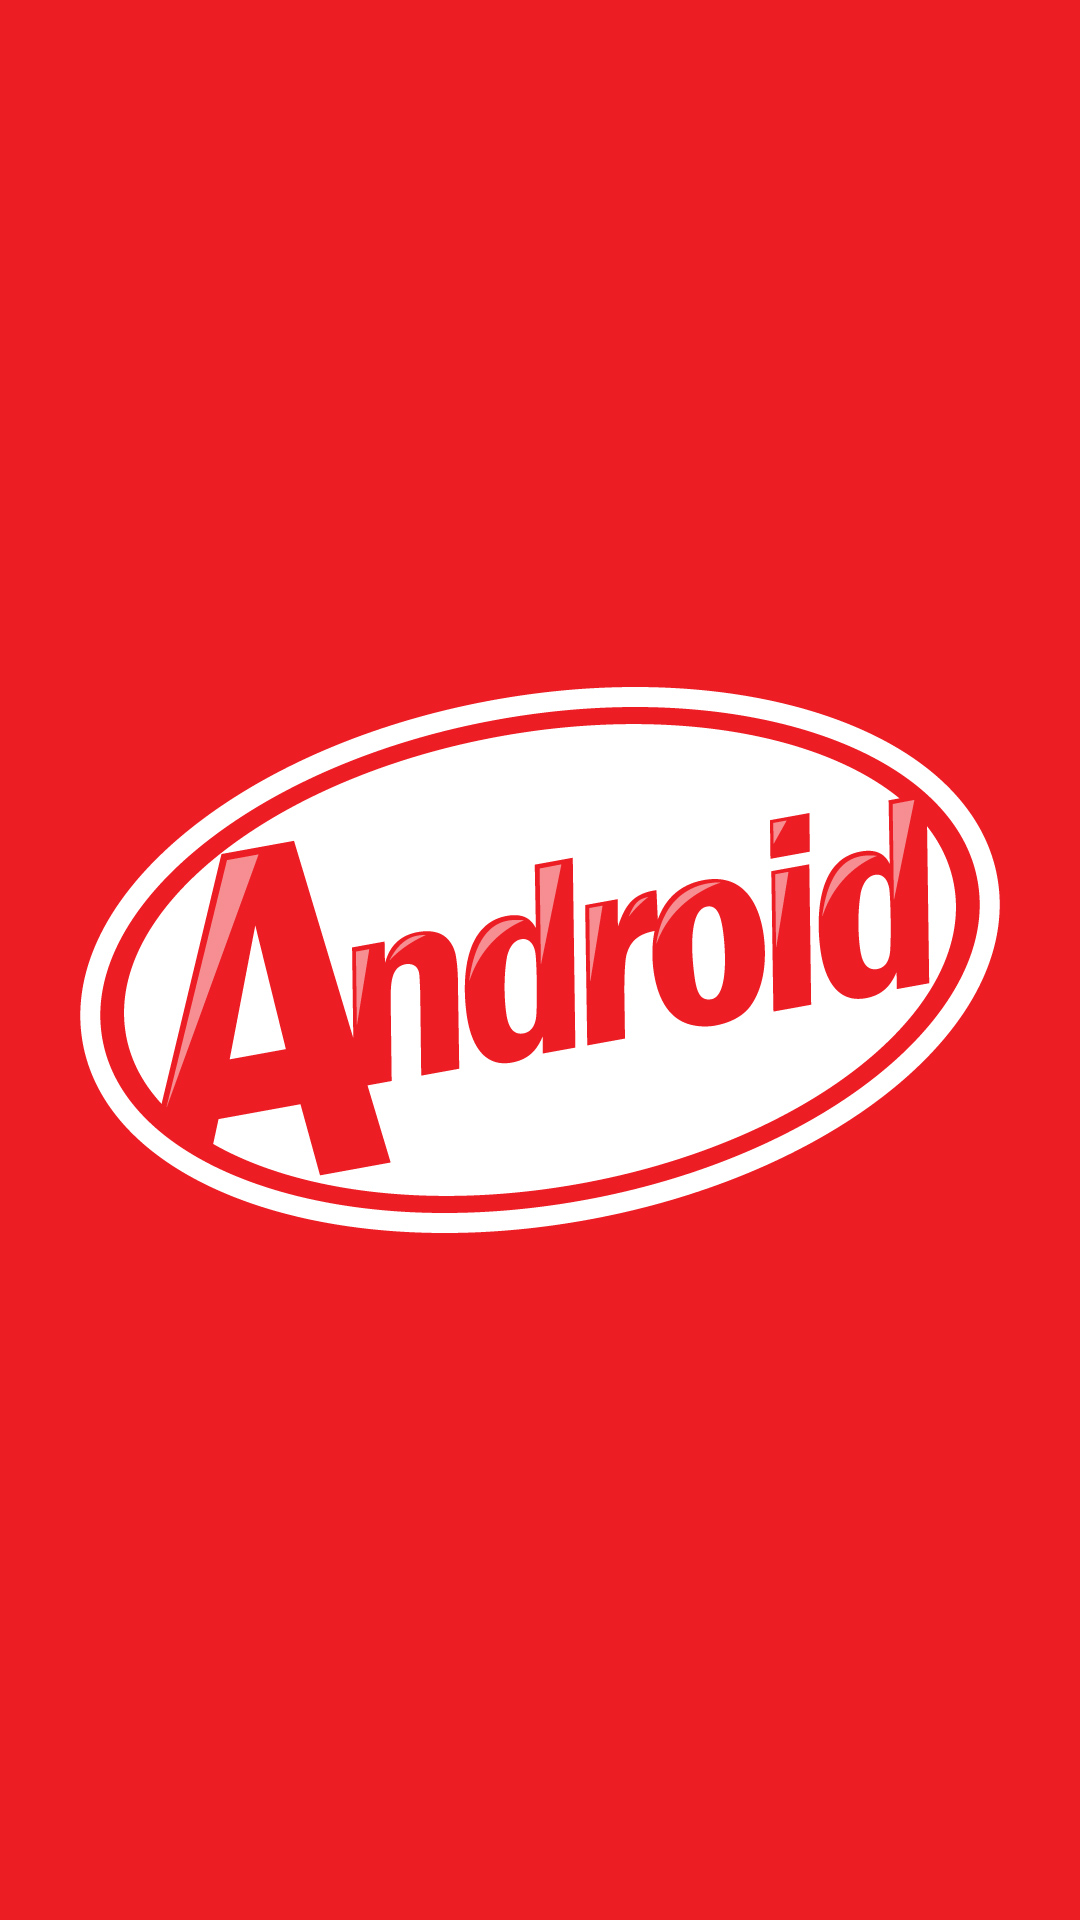 Android kitkat logo lockscreen k wallpapers free and easy to download